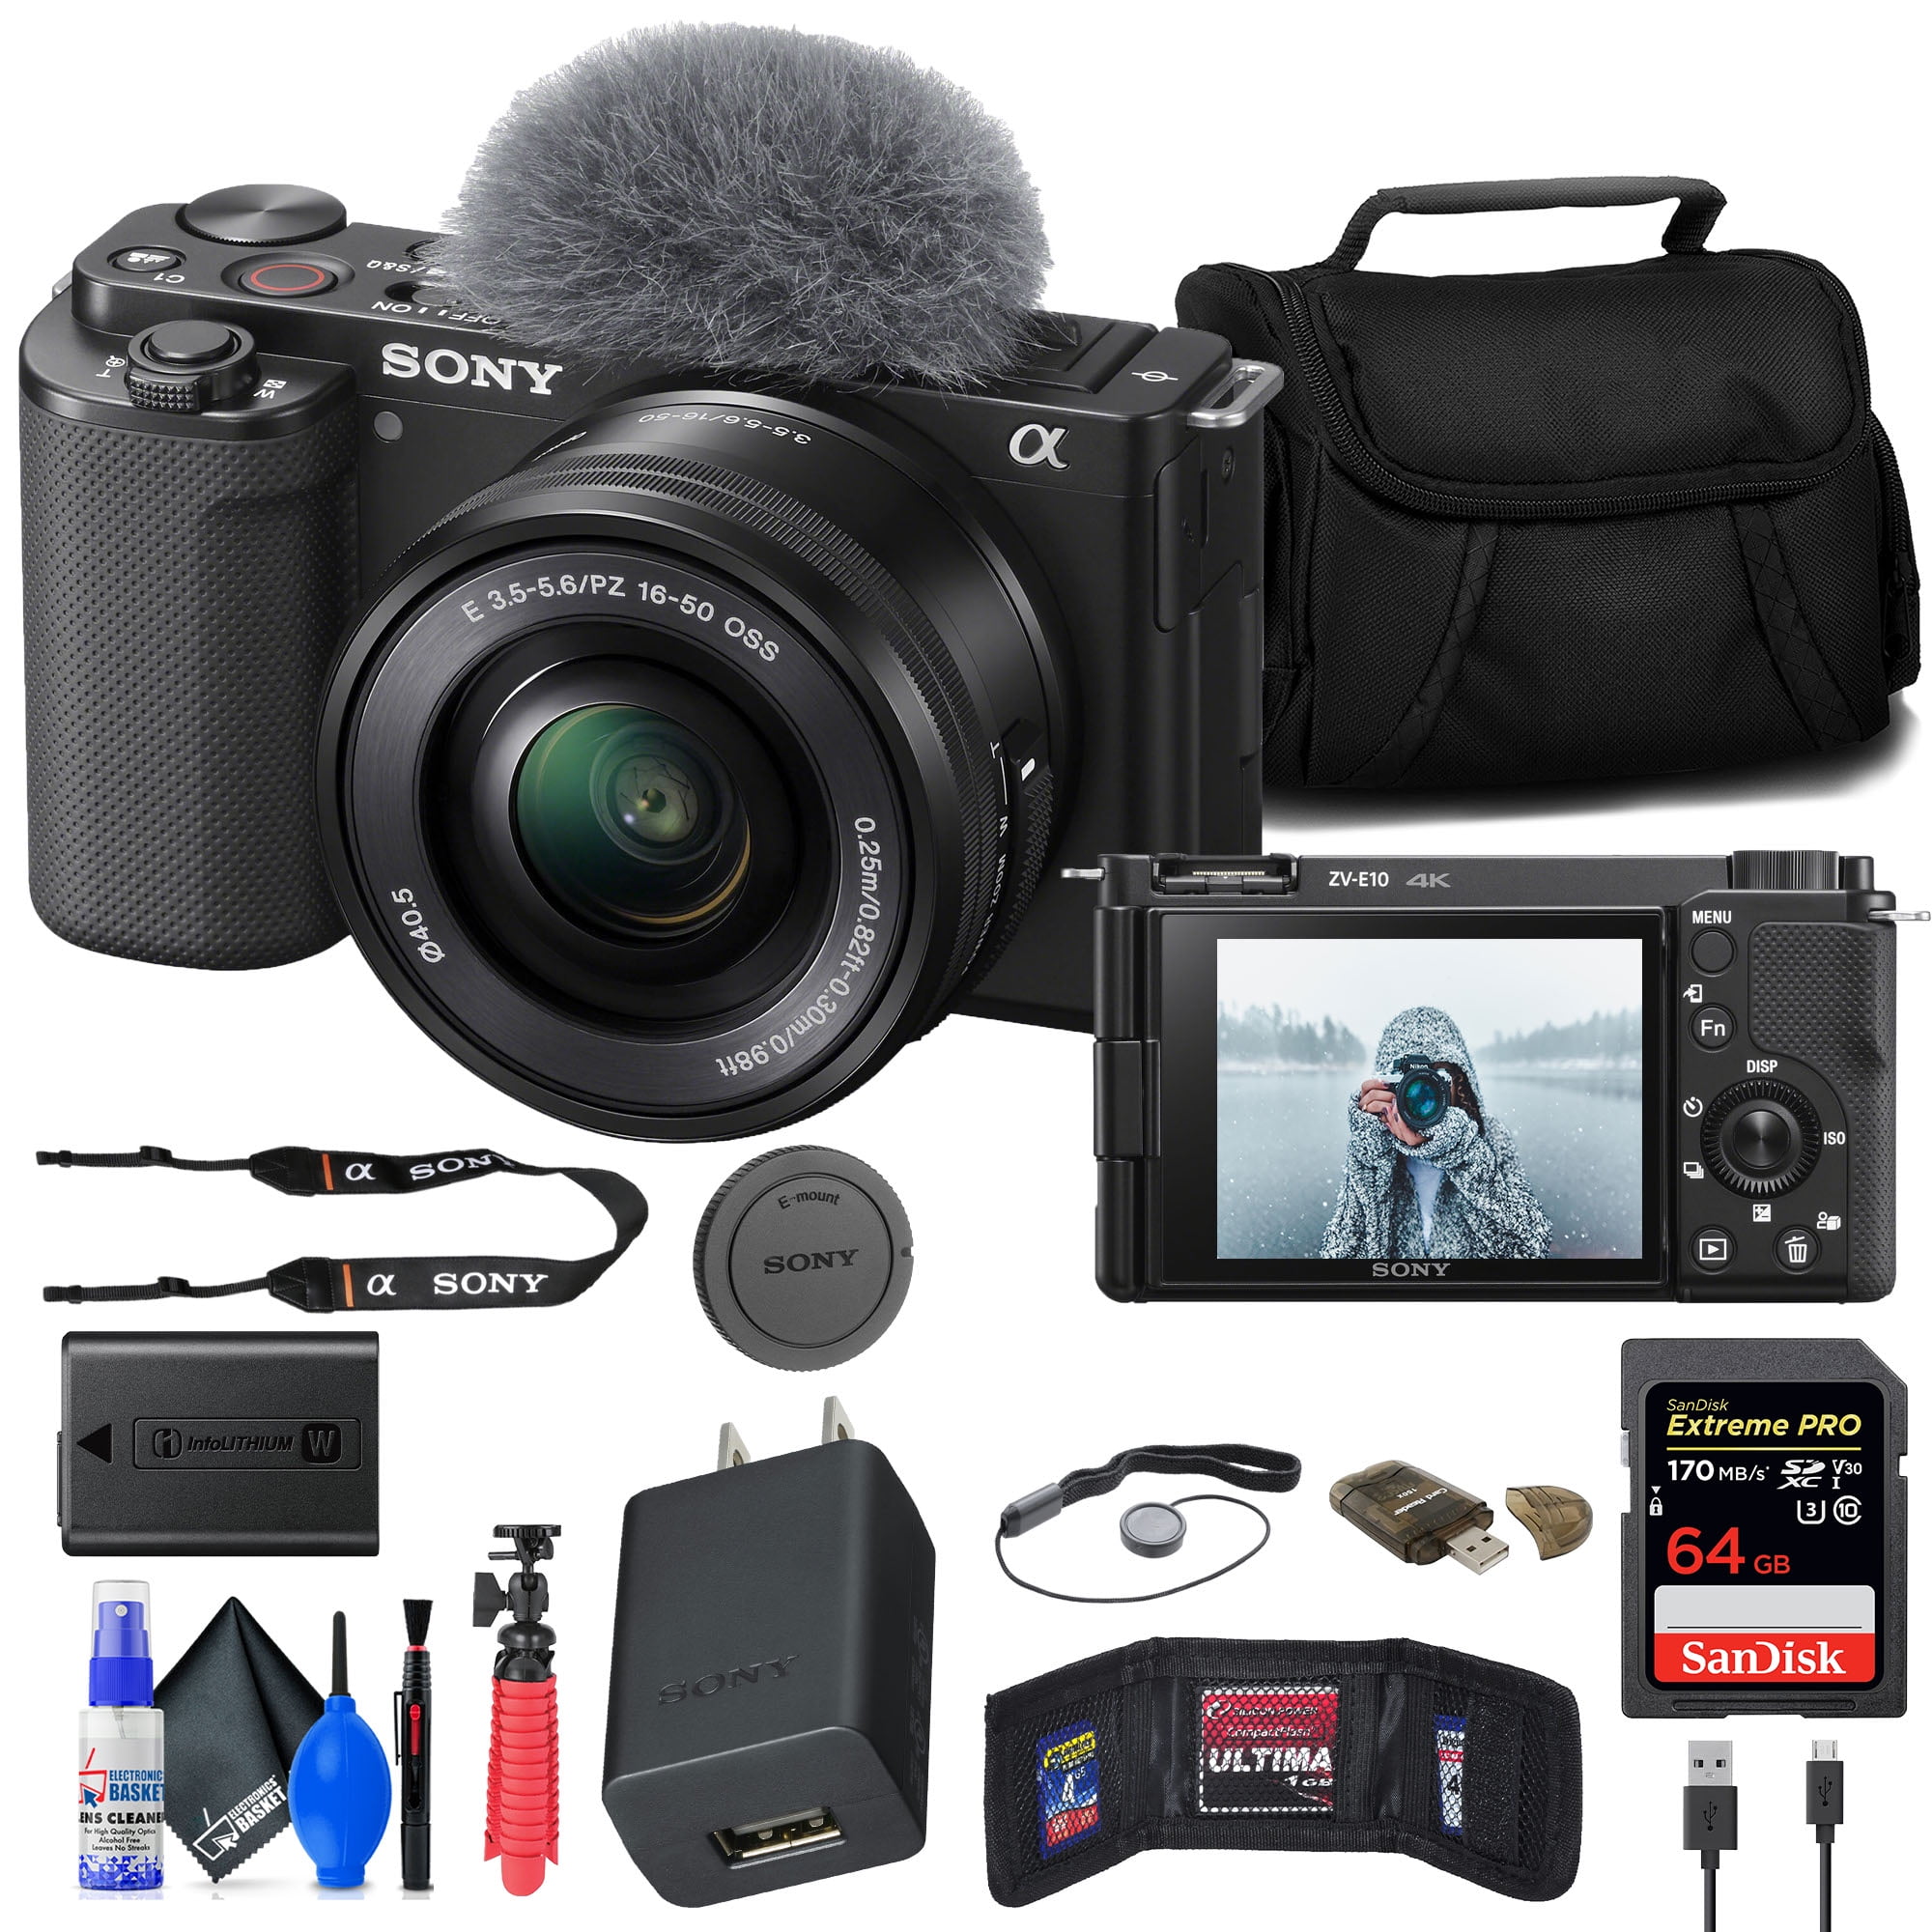 Sony ZV-E10 Mirrorless Camera with 16-50mm Lens (White) (ILCZV-E10L/W) +  Sony FE 24-70mm Lens + 64GB Memory Card + Filter Kit + External Charger +  NPF-W50 Battery + Card Reader + More 